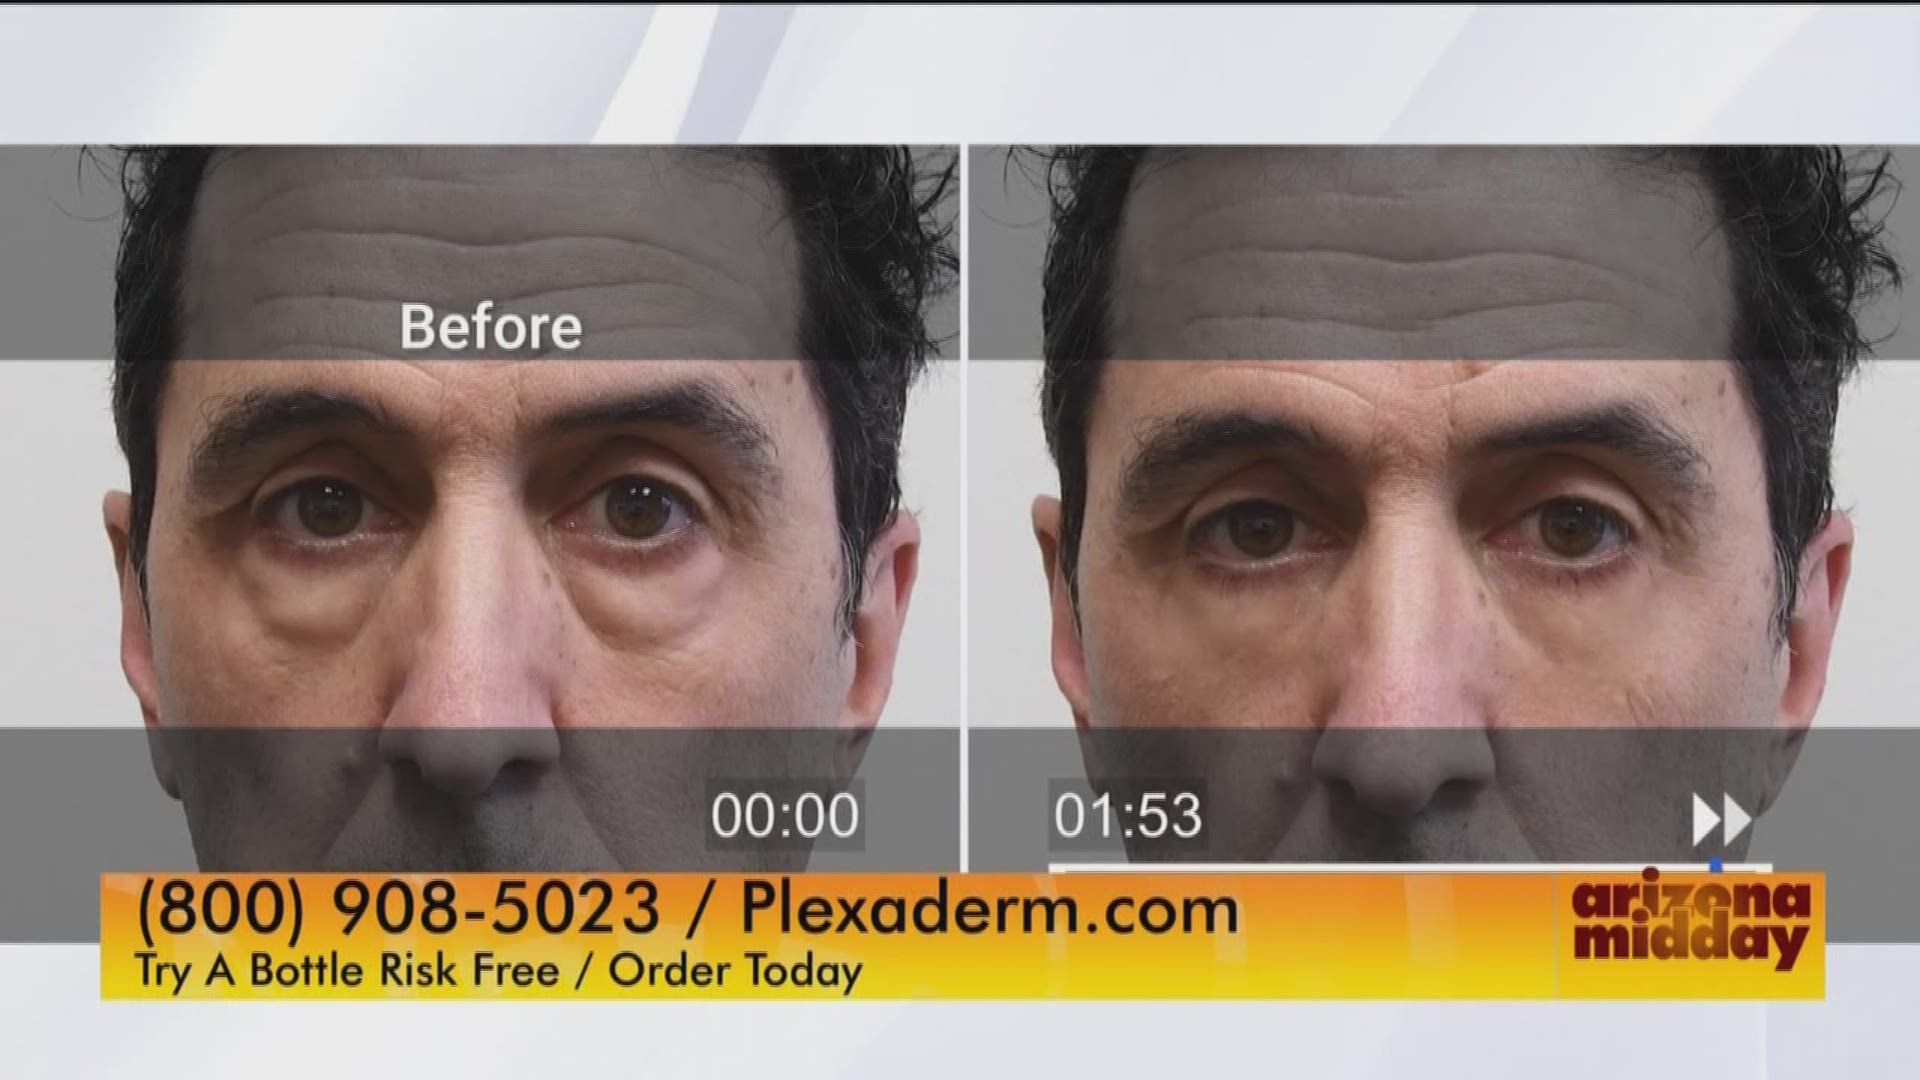 Scott DeFalco from Plexaderm tells how you can look years younger in just two minutes.